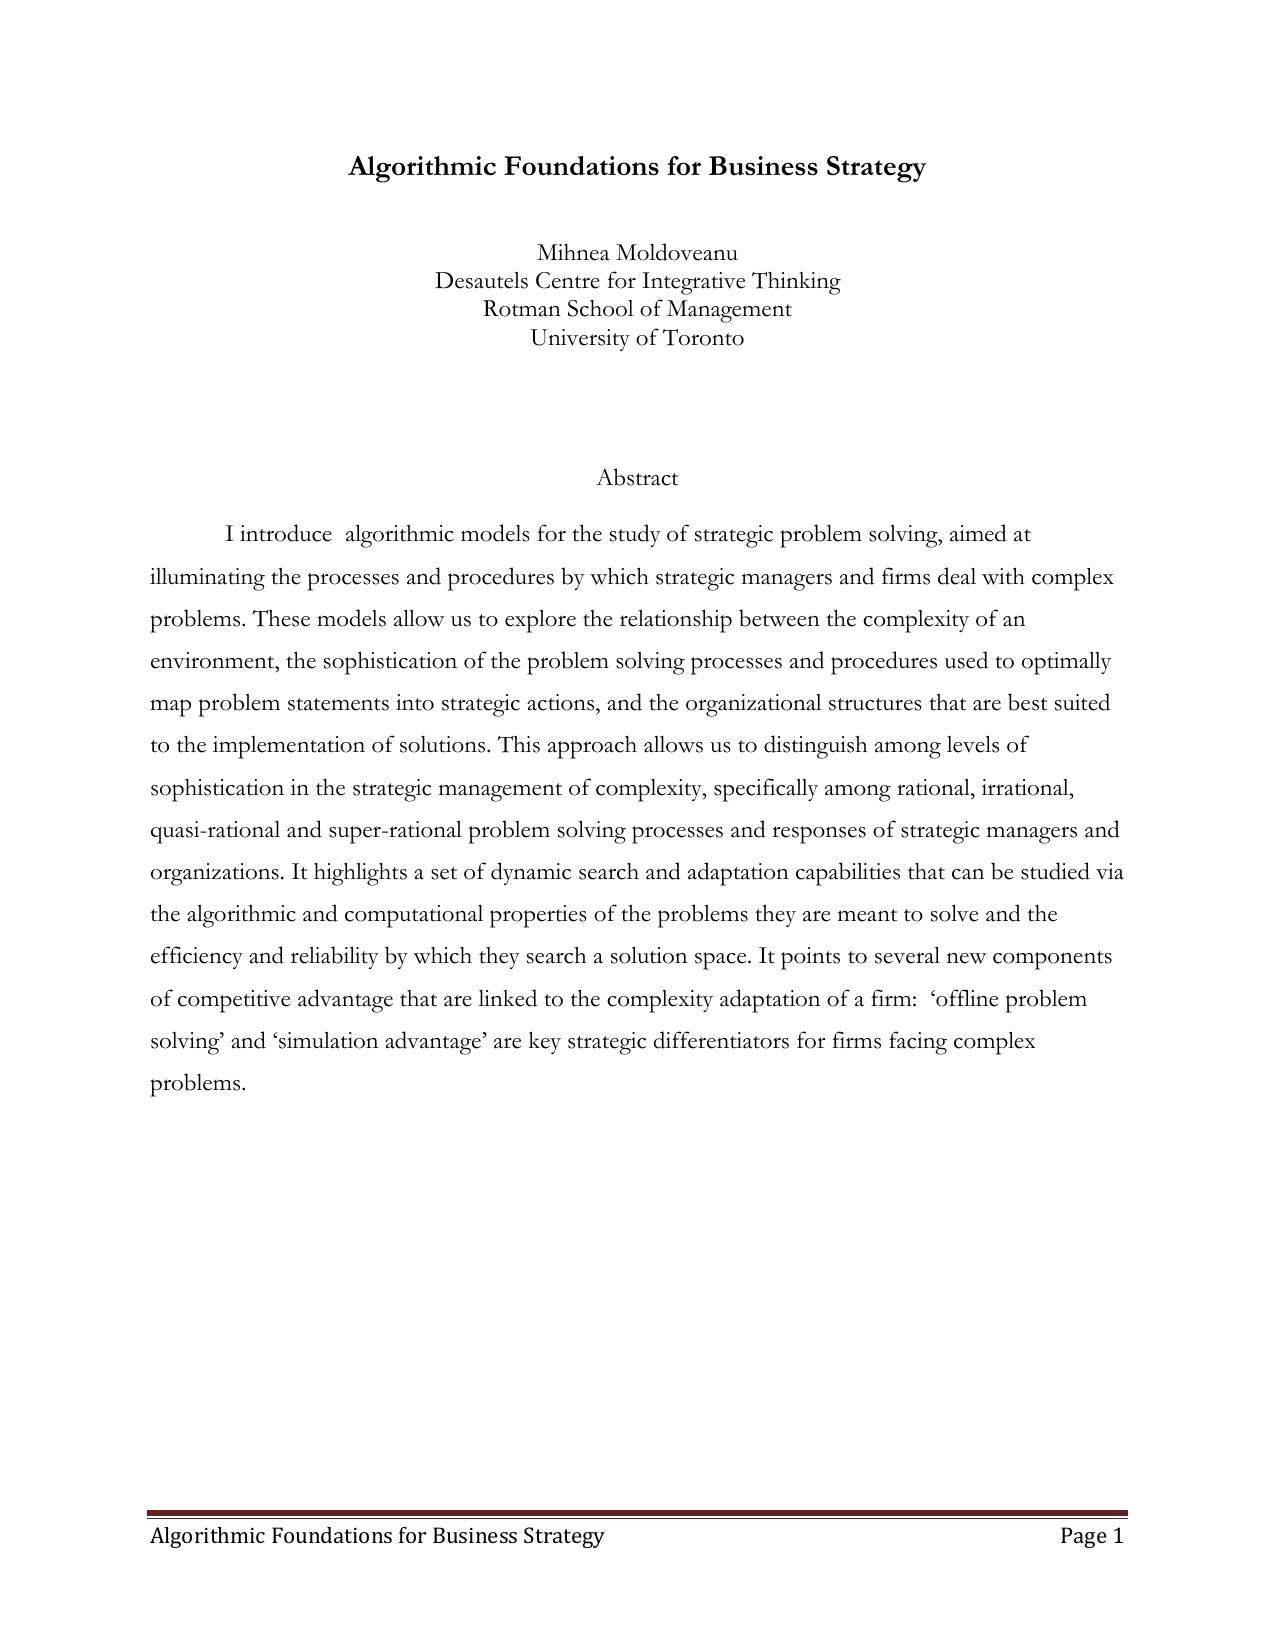 Algorithmic Foundations for Business Strategy (Paper)